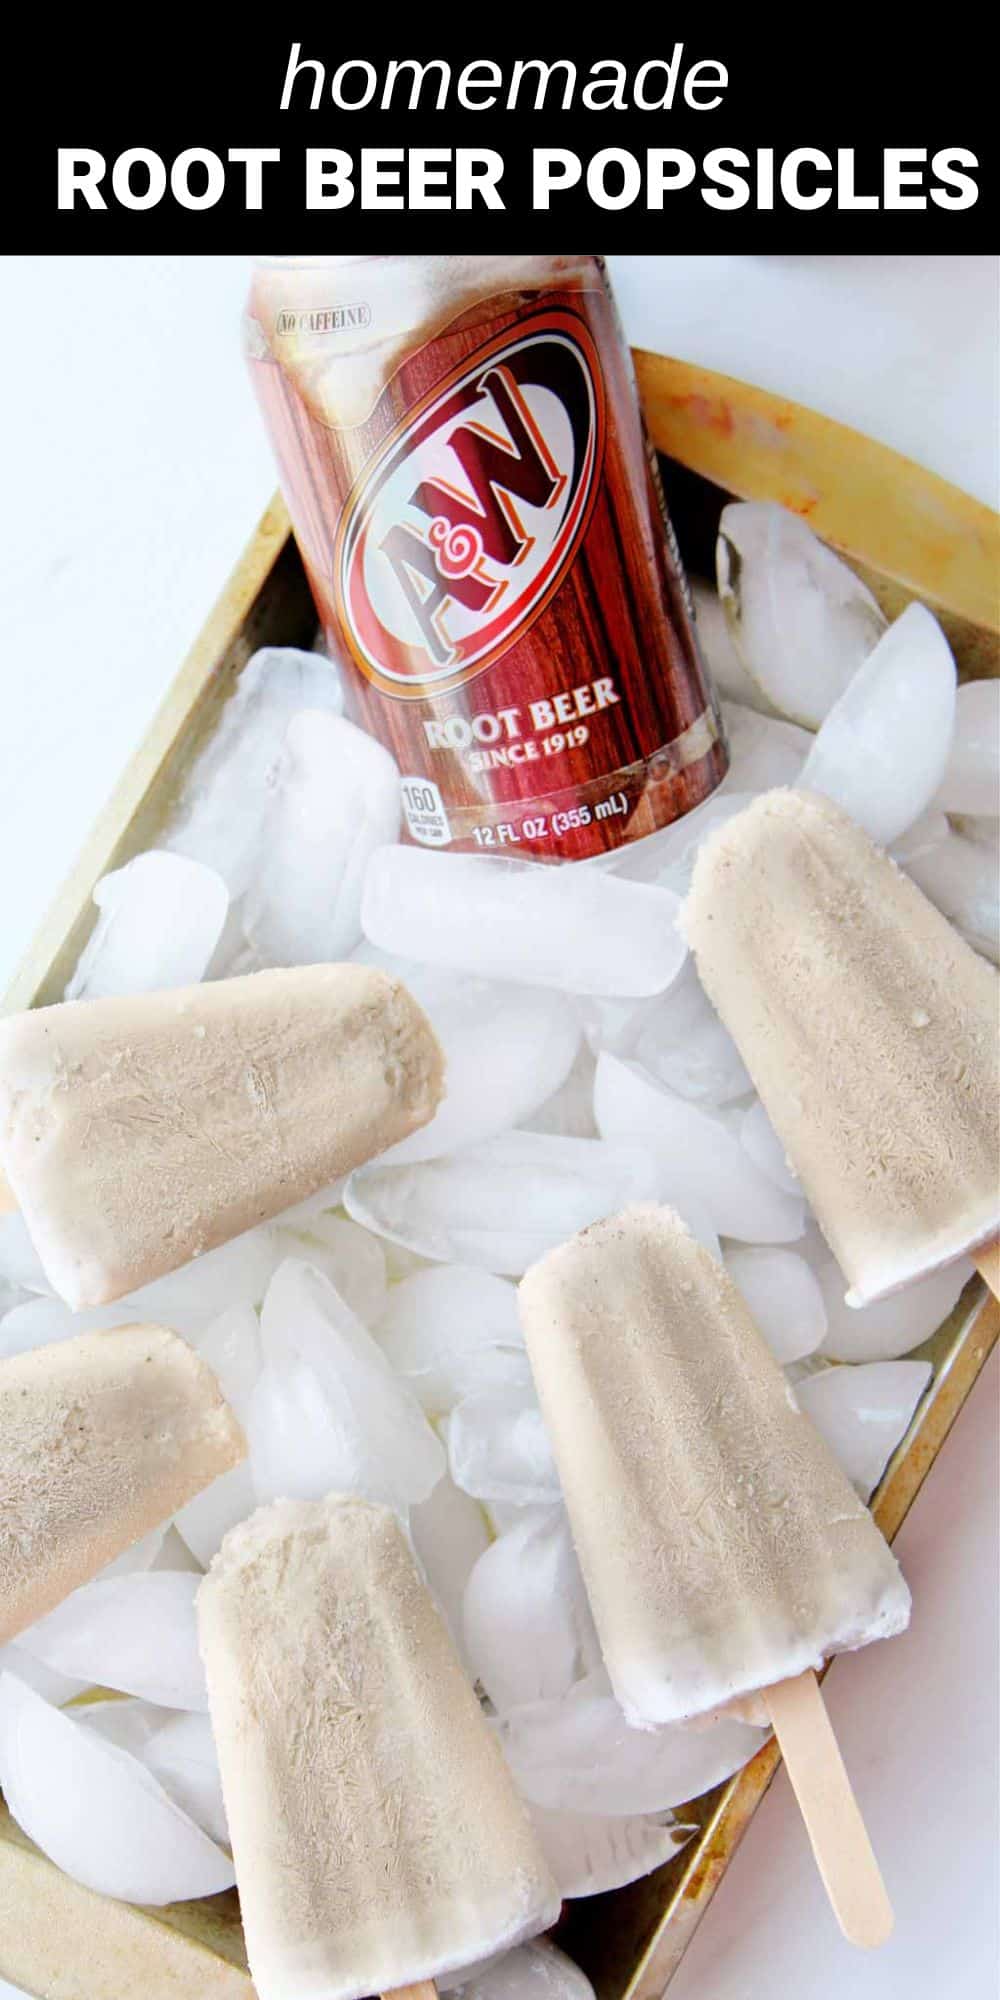 These root beer popsicles are like root beer floats on a stick! They’re a creamy and frosty two-ingredient treat that you’ll want to keep on hand during the summer months.